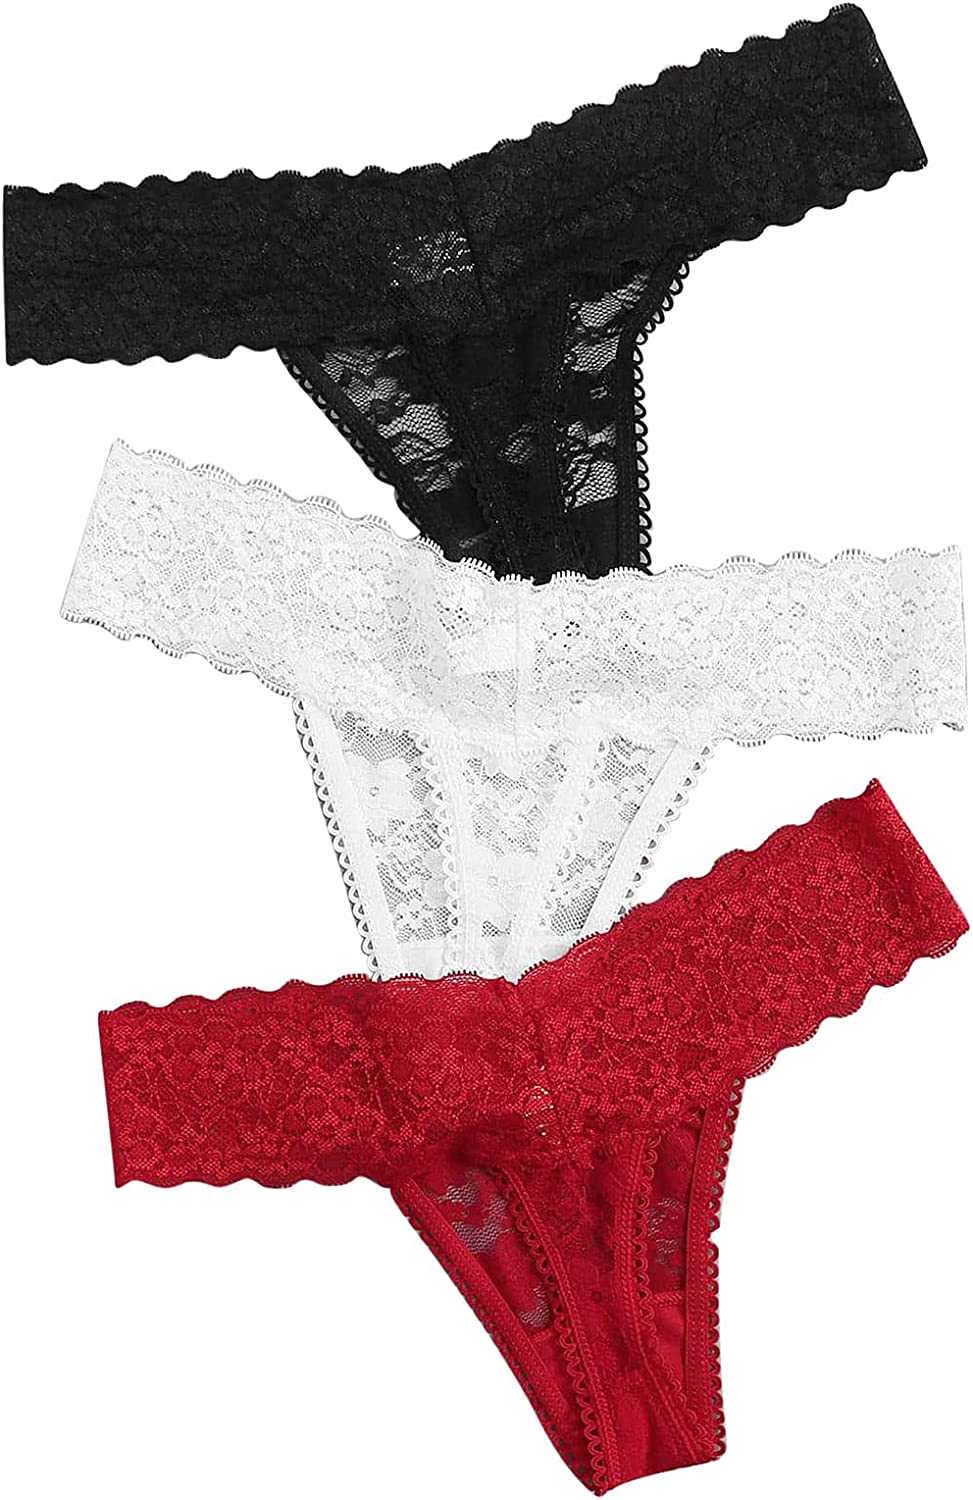 Women’s Sexy Panties,Lace Thongs G-String See Through Underwear Cotton Seamless Lace Thongs Gift for Valentine 2/3-Pack